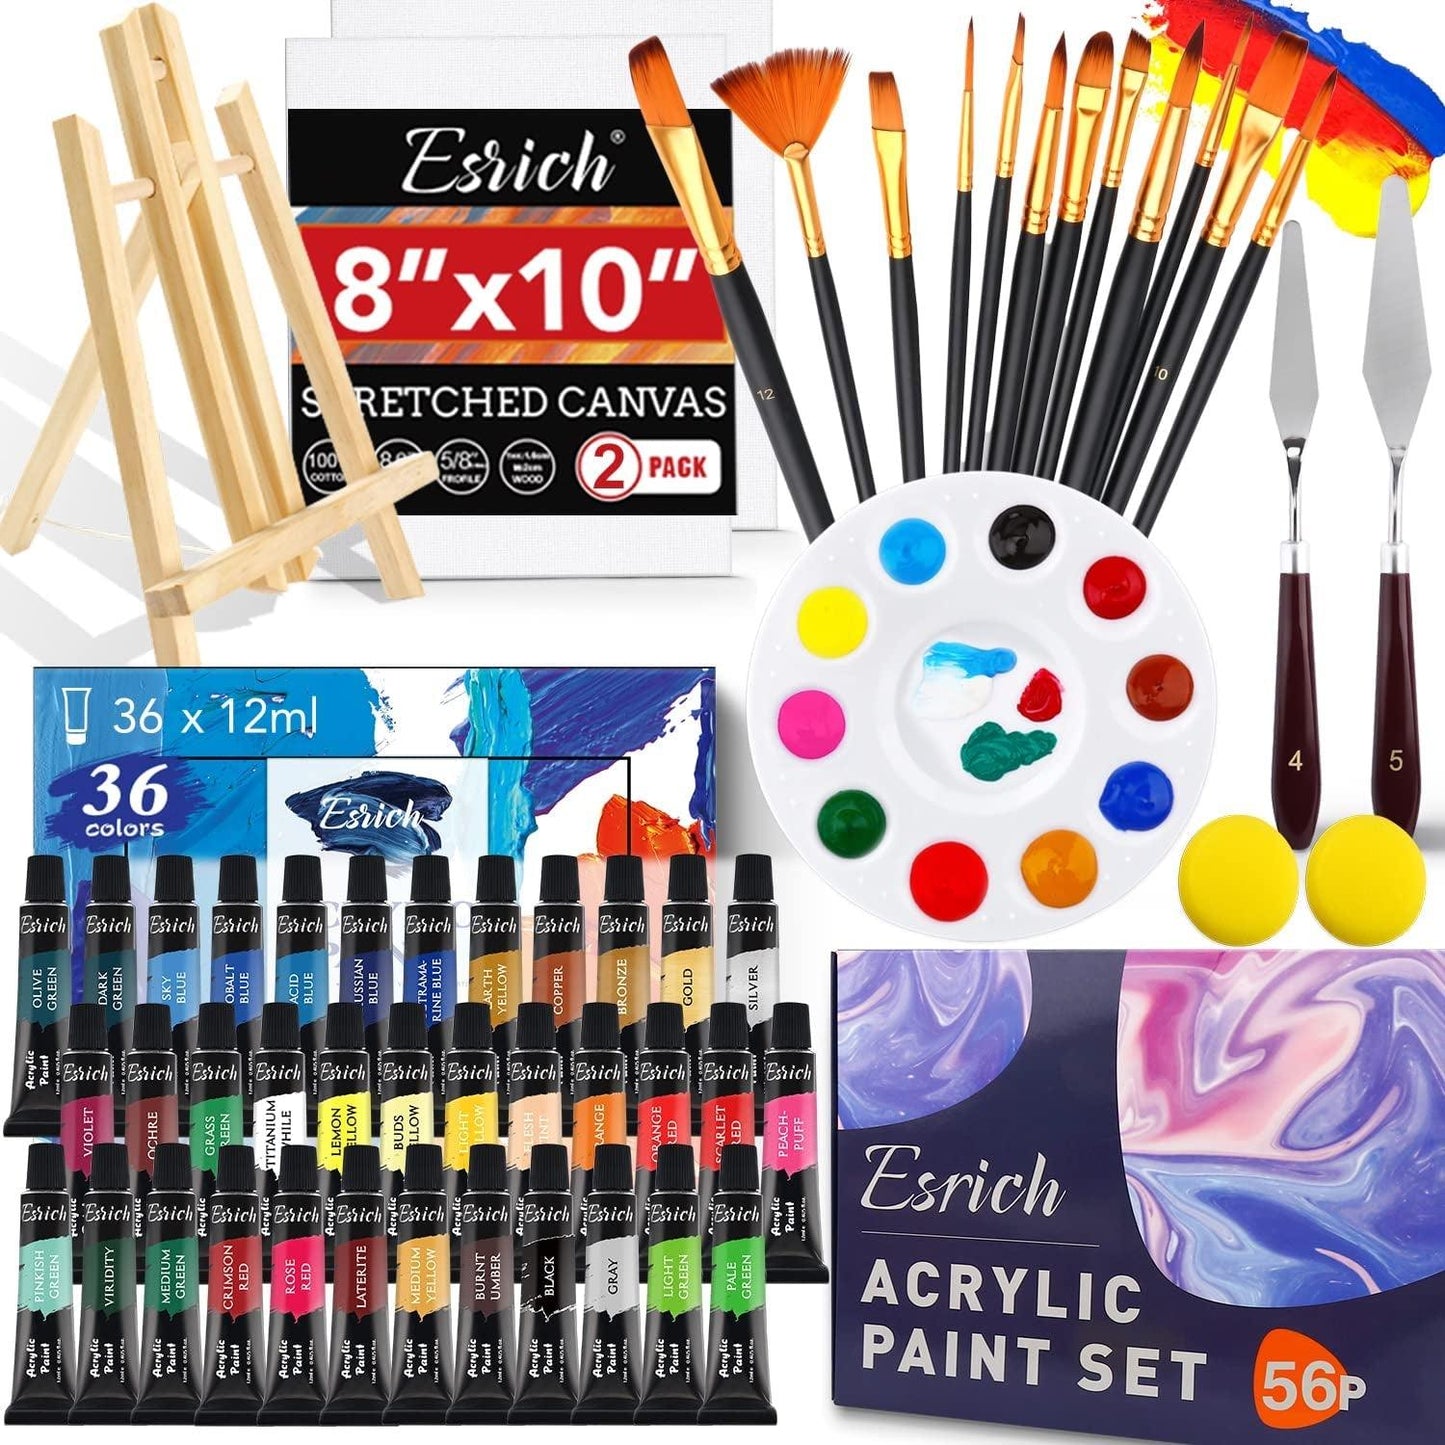 Acrylic Paint Set,56 PCS with Paint Brushes, 36 Colors Acrylic Paints, 1 Easel, 2 Painting Canvases, Palette, Paint Knives and Art Sponges - WoodArtSupply